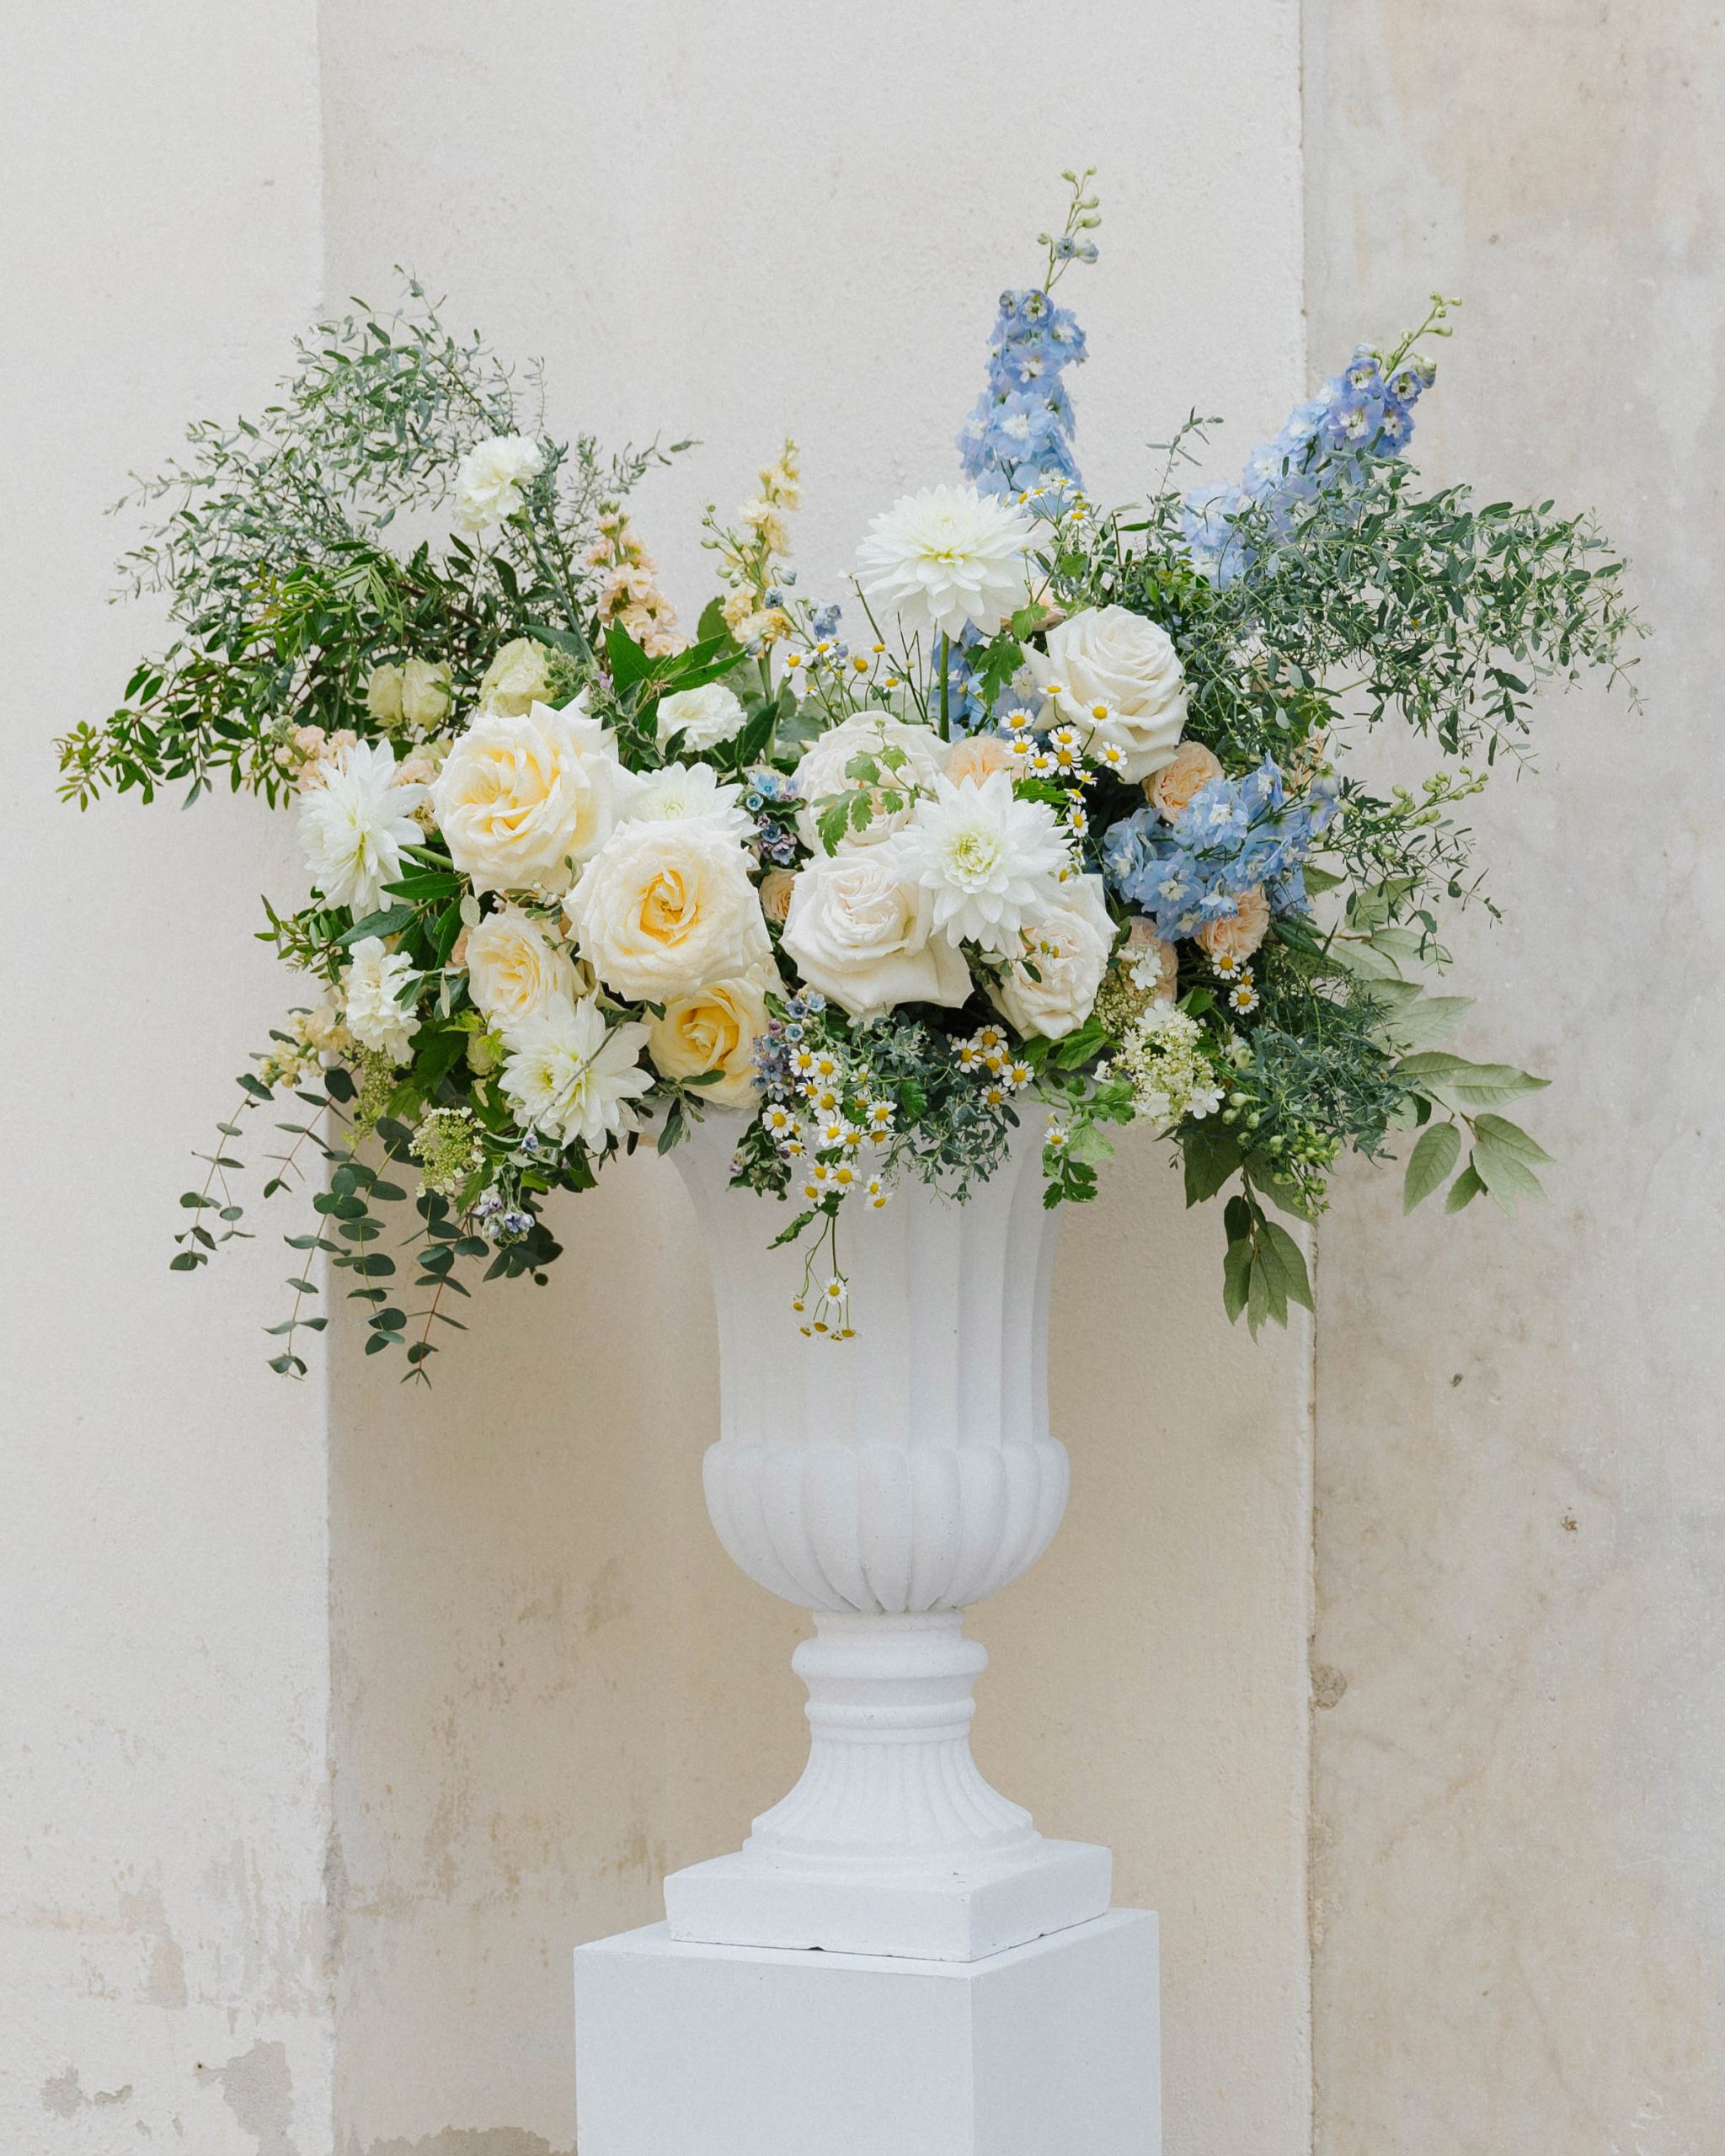 White vase with yellow, white and dusty blue flower arrangement